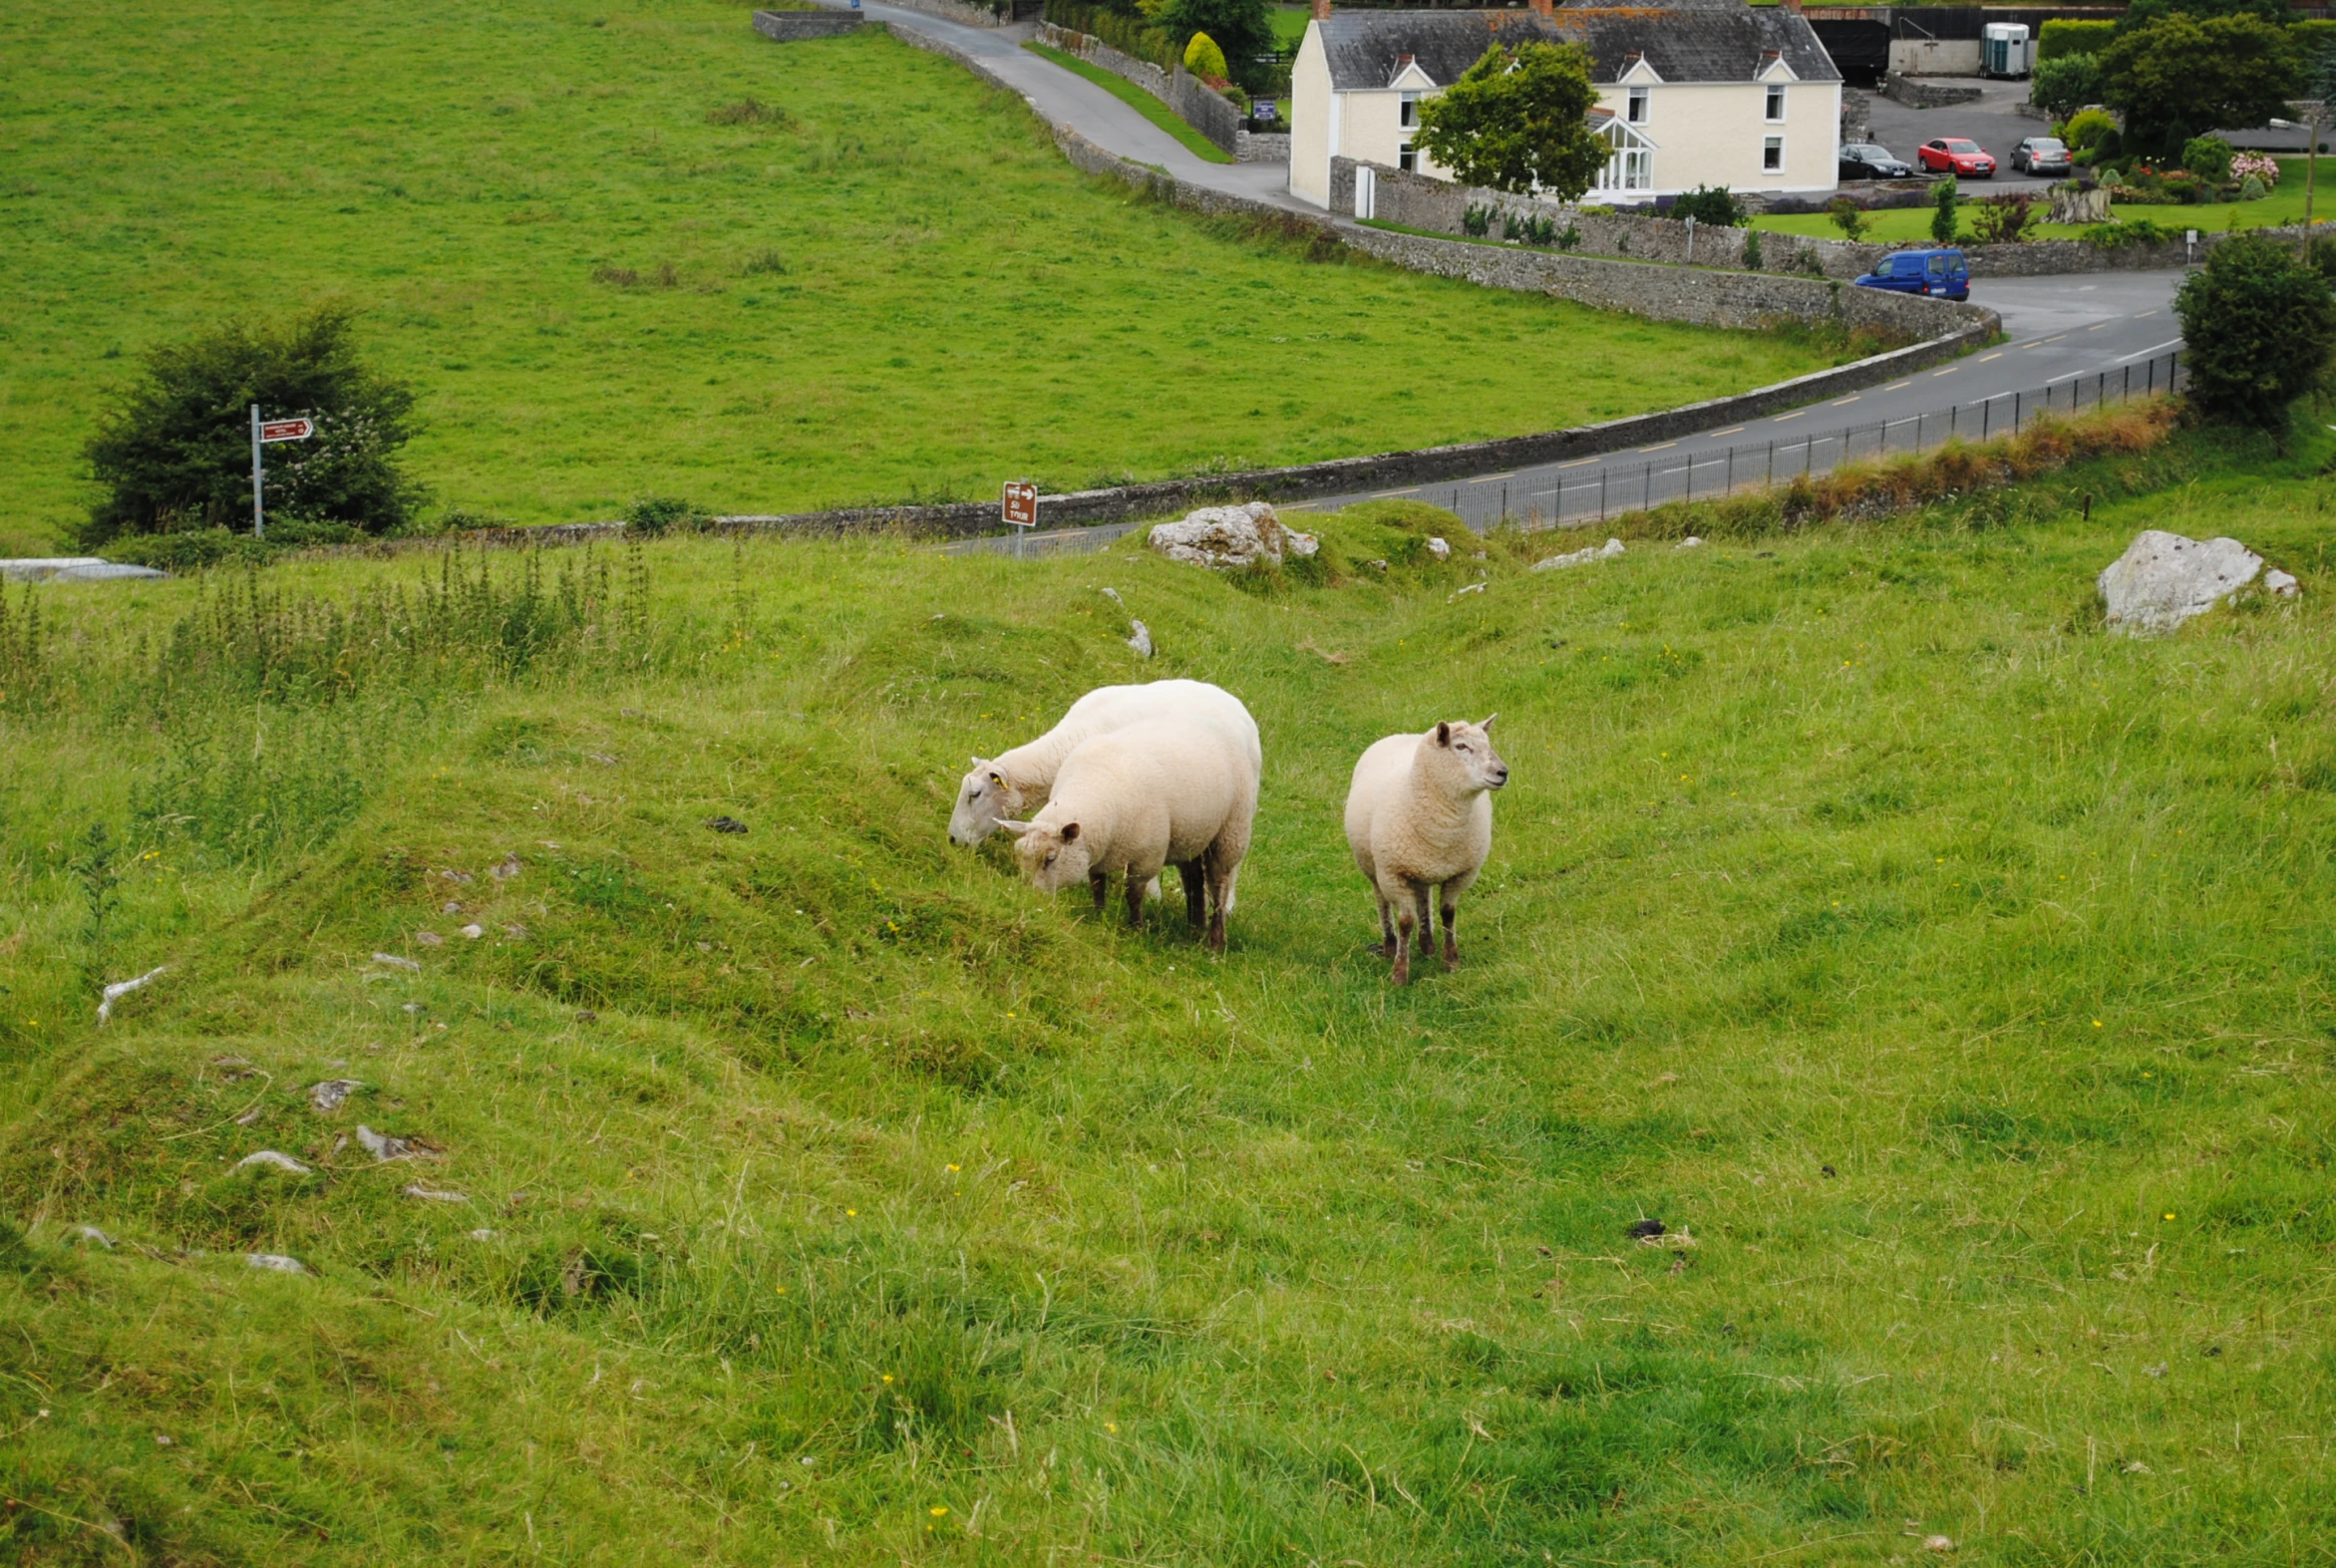 there are two sheep grazing in a field